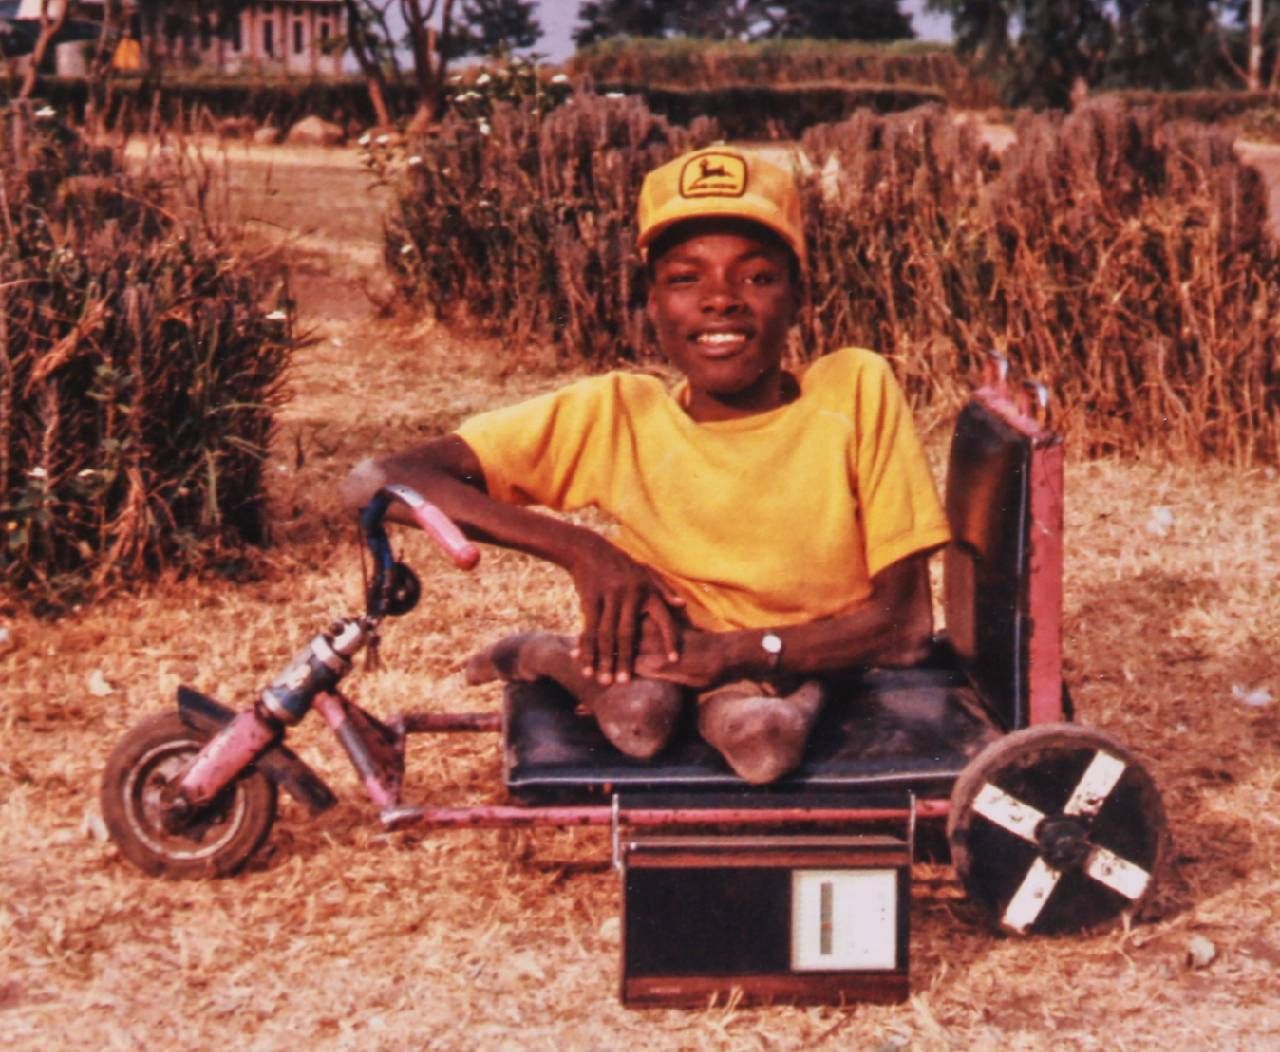 A young person sitting in a small cart. Next Avenue, veteran, transformation